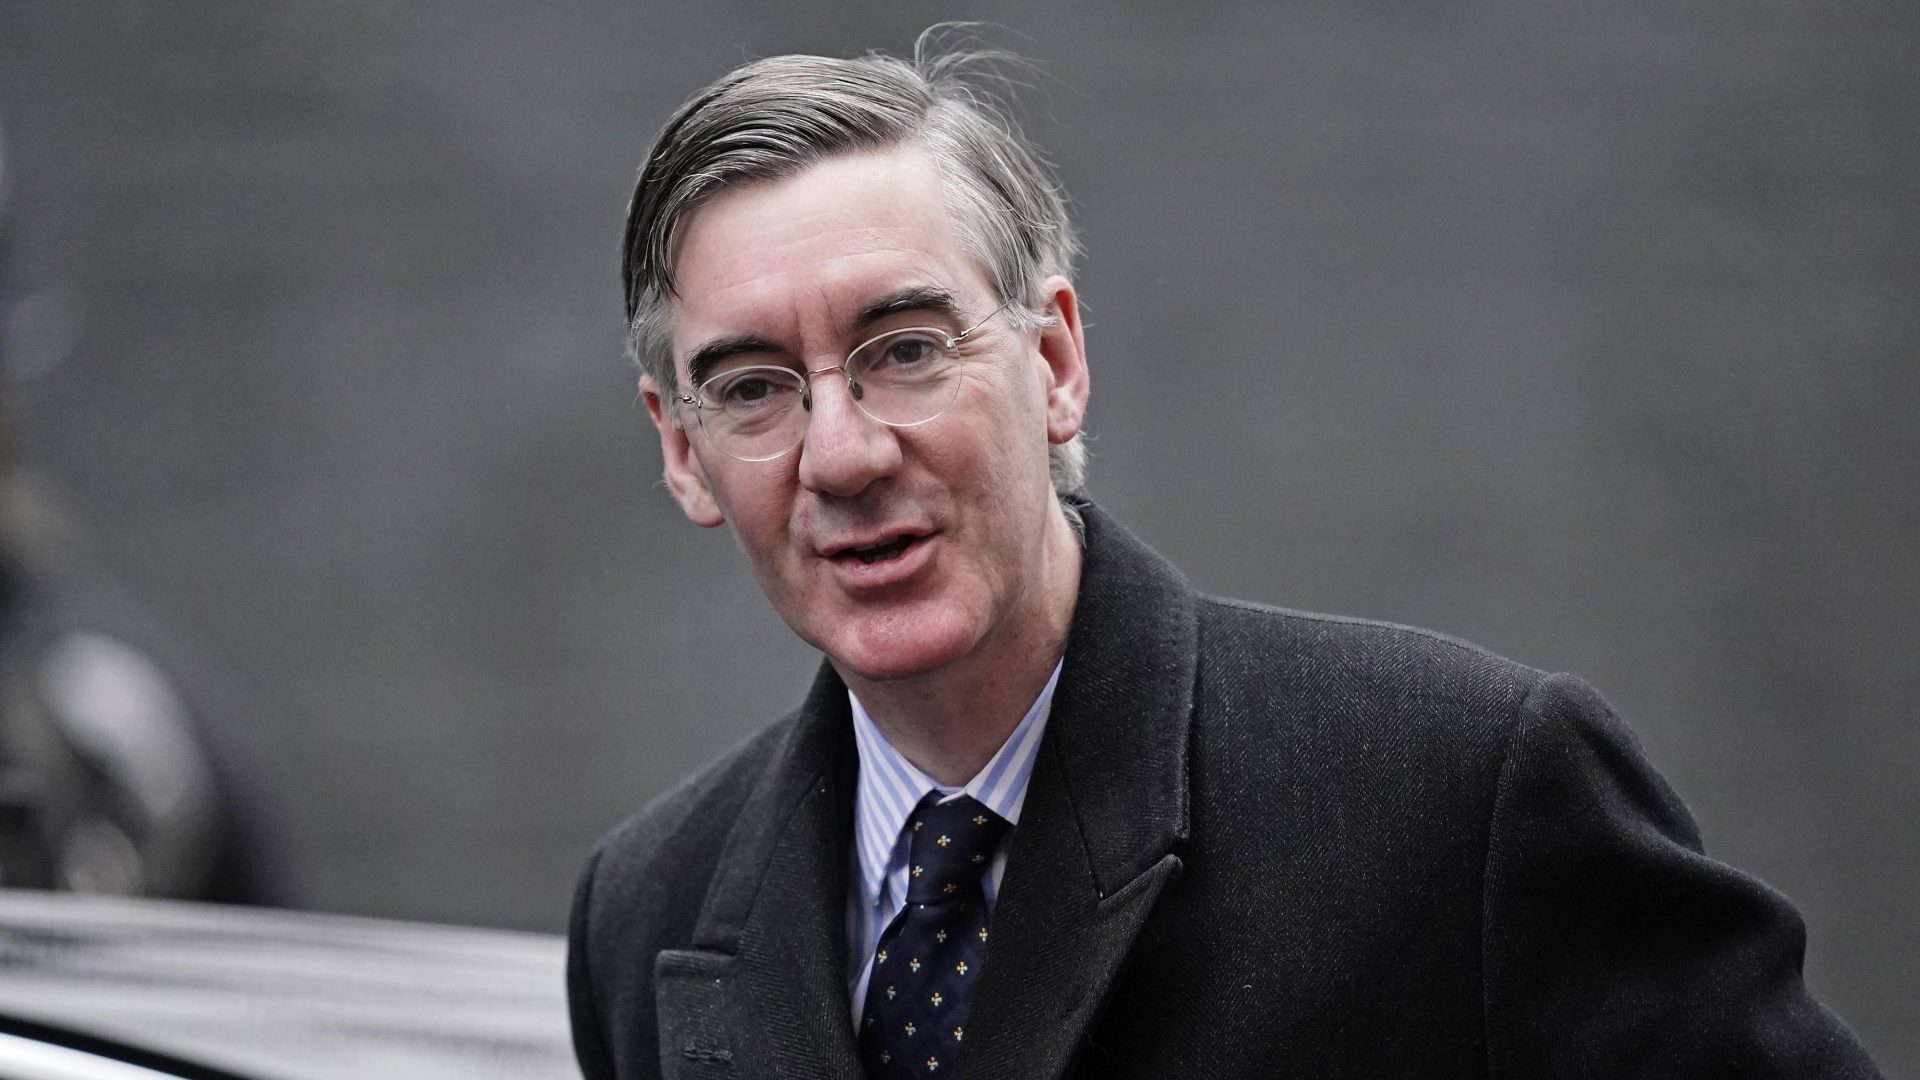 Jacob Rees-Mogg arrives in Downing Street. Photo: Aaron Chown/PA Wire/PA Images.